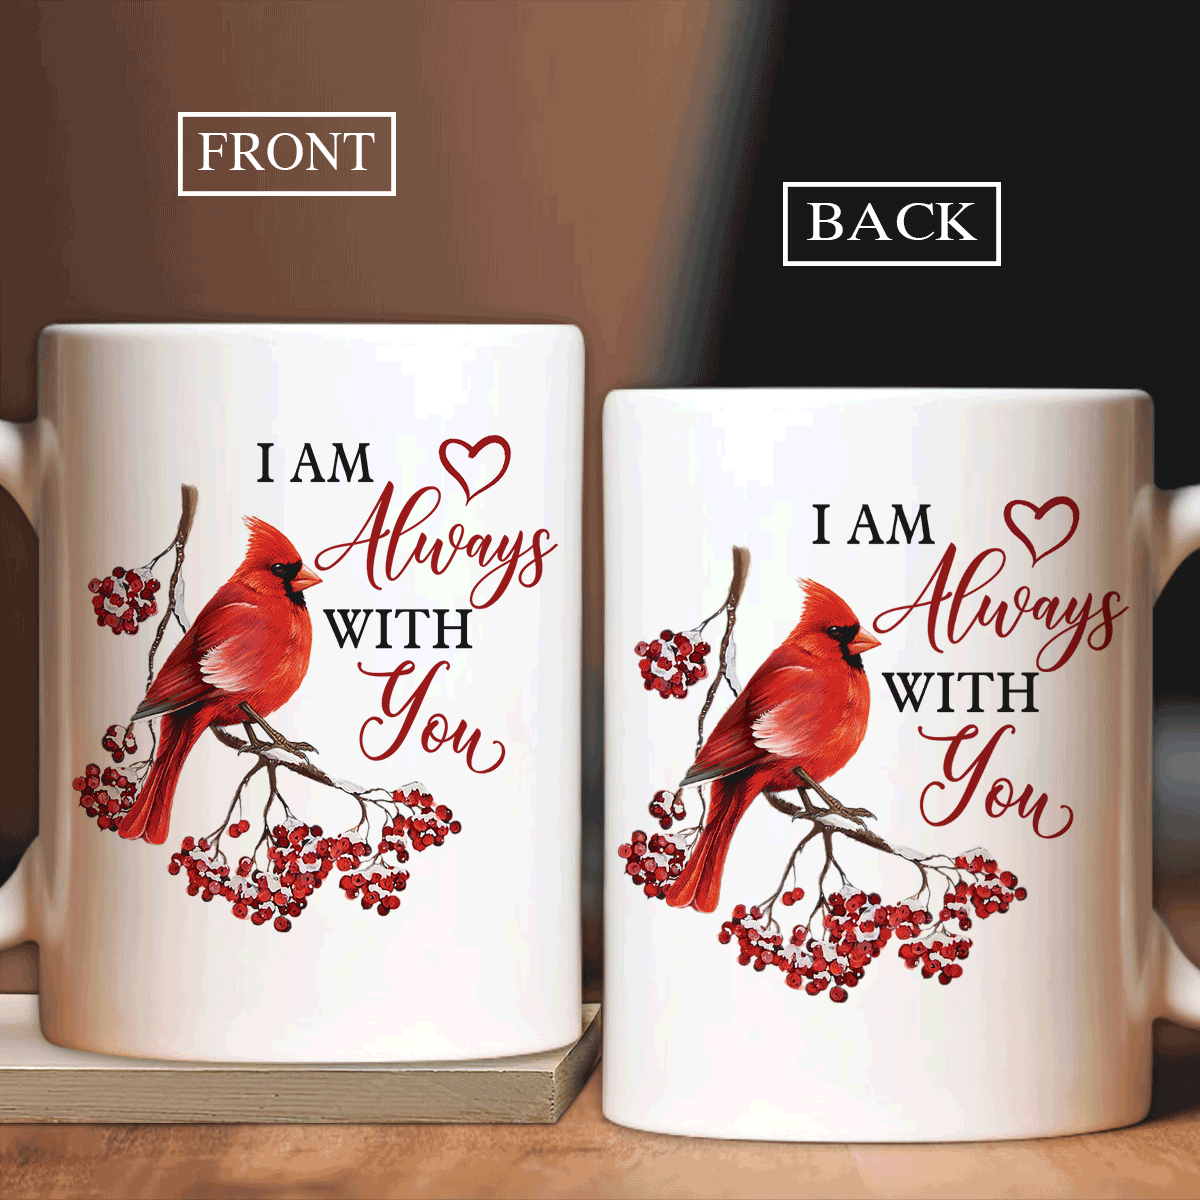 Memorial White Mug - Red cardinal, Winter tree painting - Gift for members family - I am always with you - Heaven White Mug.